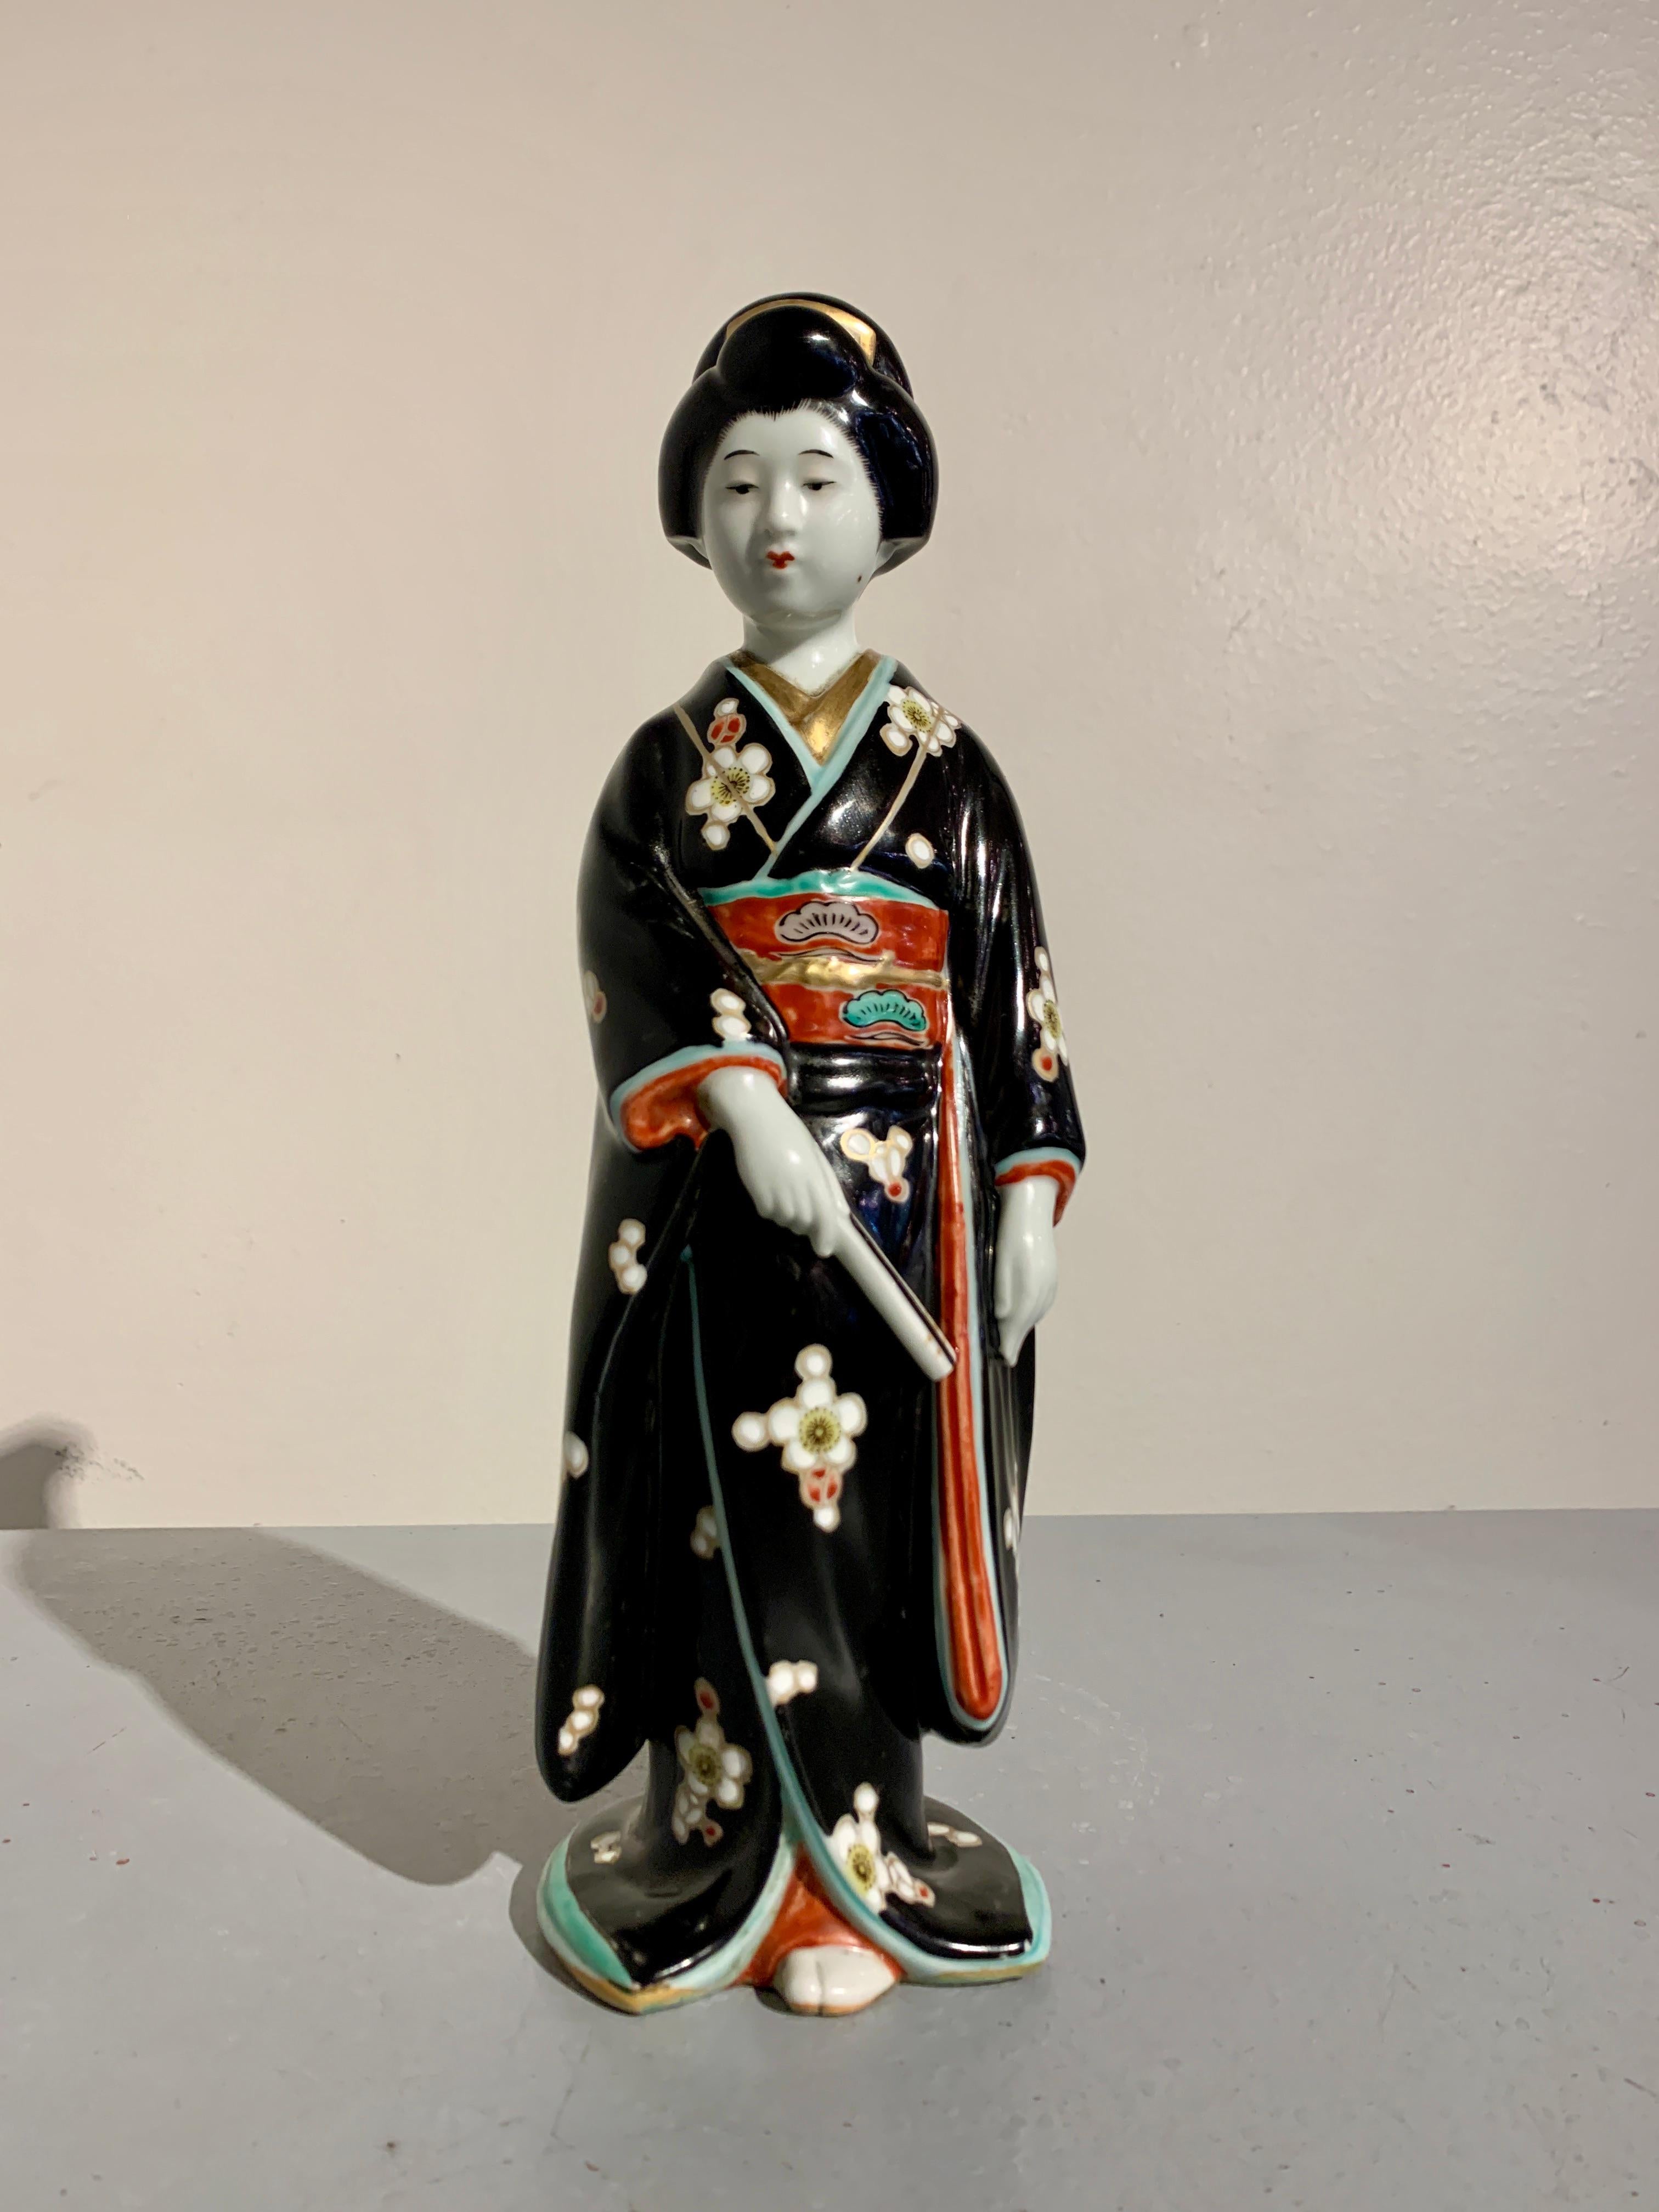 A charming and delightful Japanese Kutani enameled porcelain figure of a bijin or geisha, early Showa Era, circa 1930's, Japan.

The elegant figure of a beautiful woman, called a bijin, portrayed dressed in full kimono and holding a fan in one